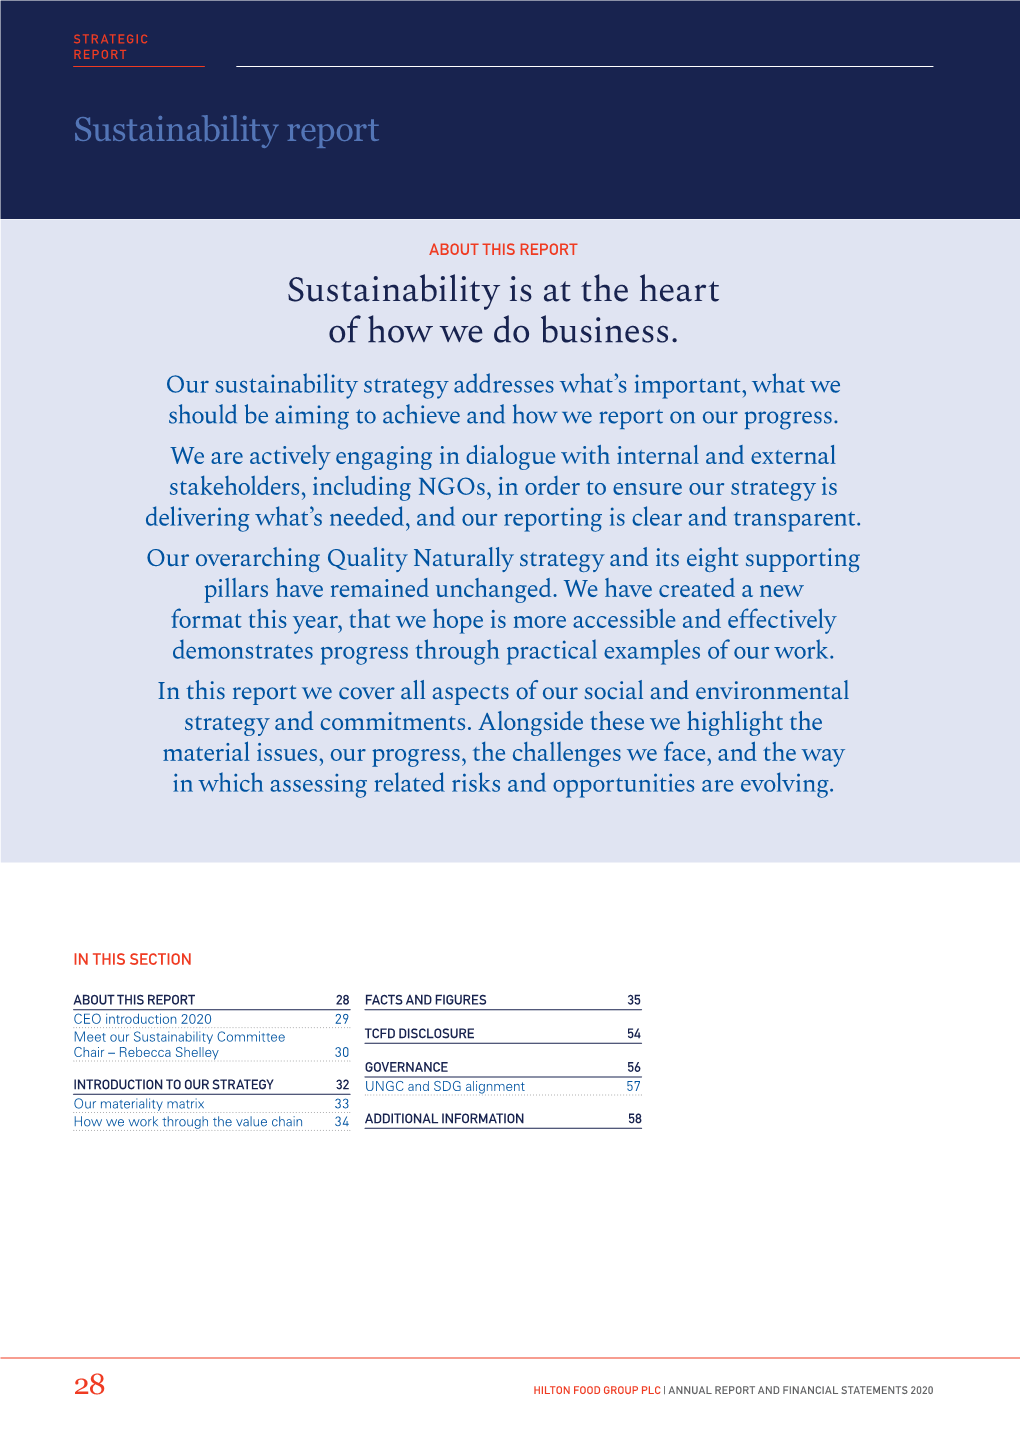 Sustainability Is at the Heart of How We Do Business